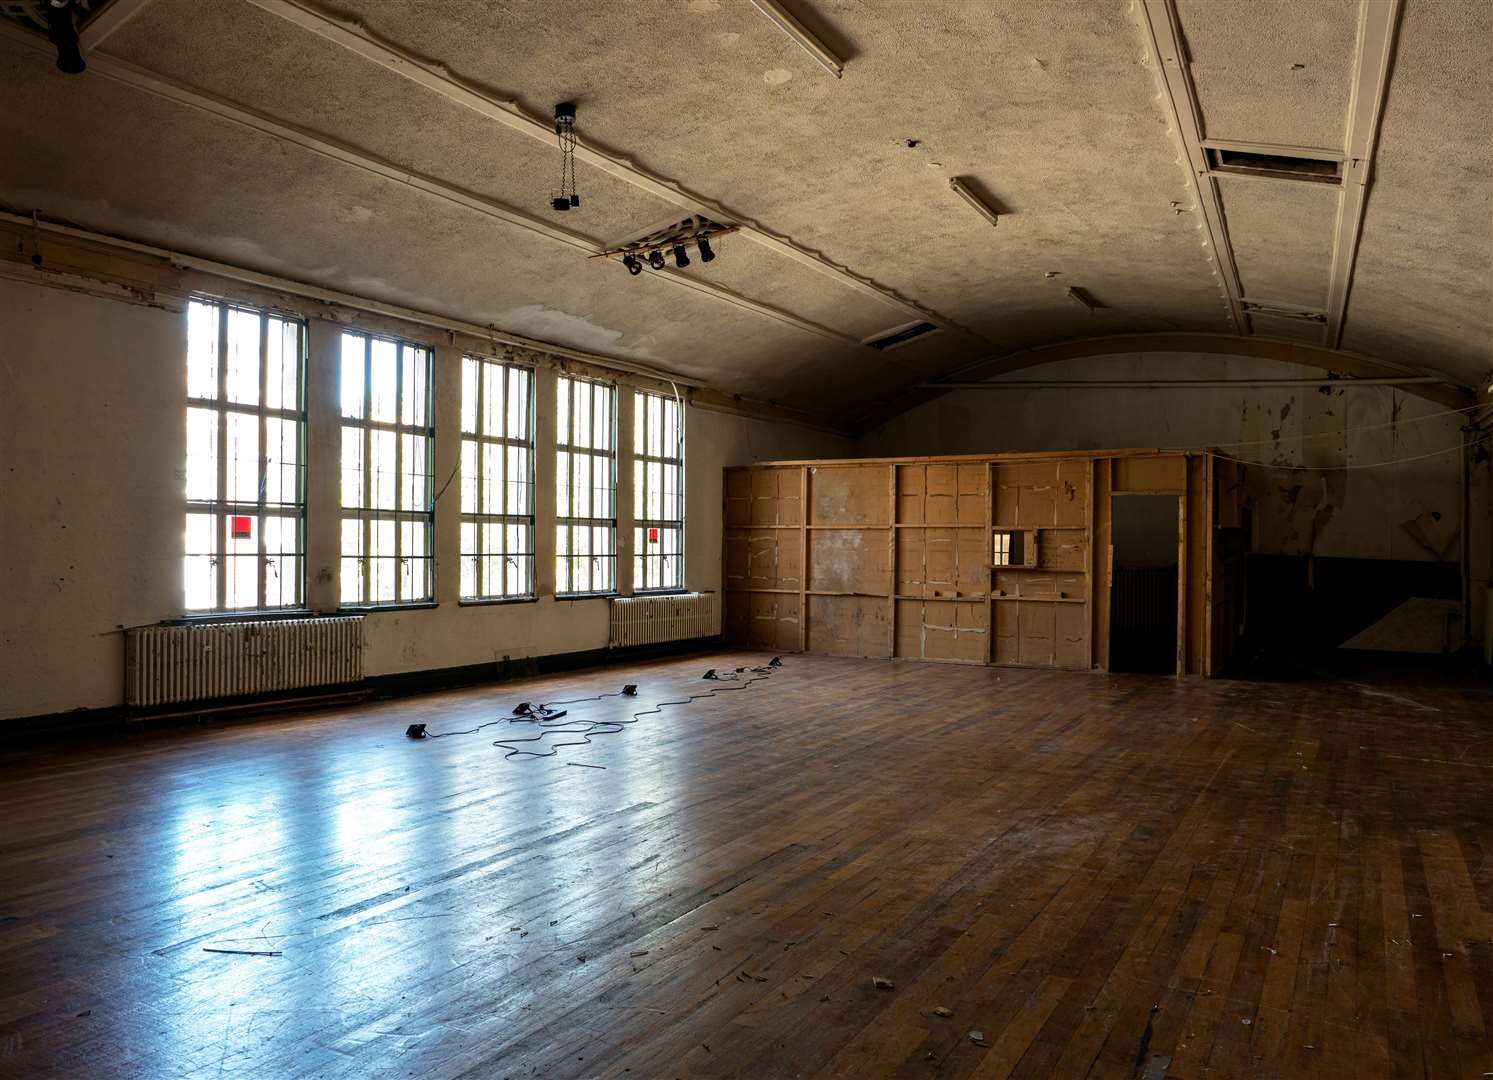 The former ballroom on the first floor